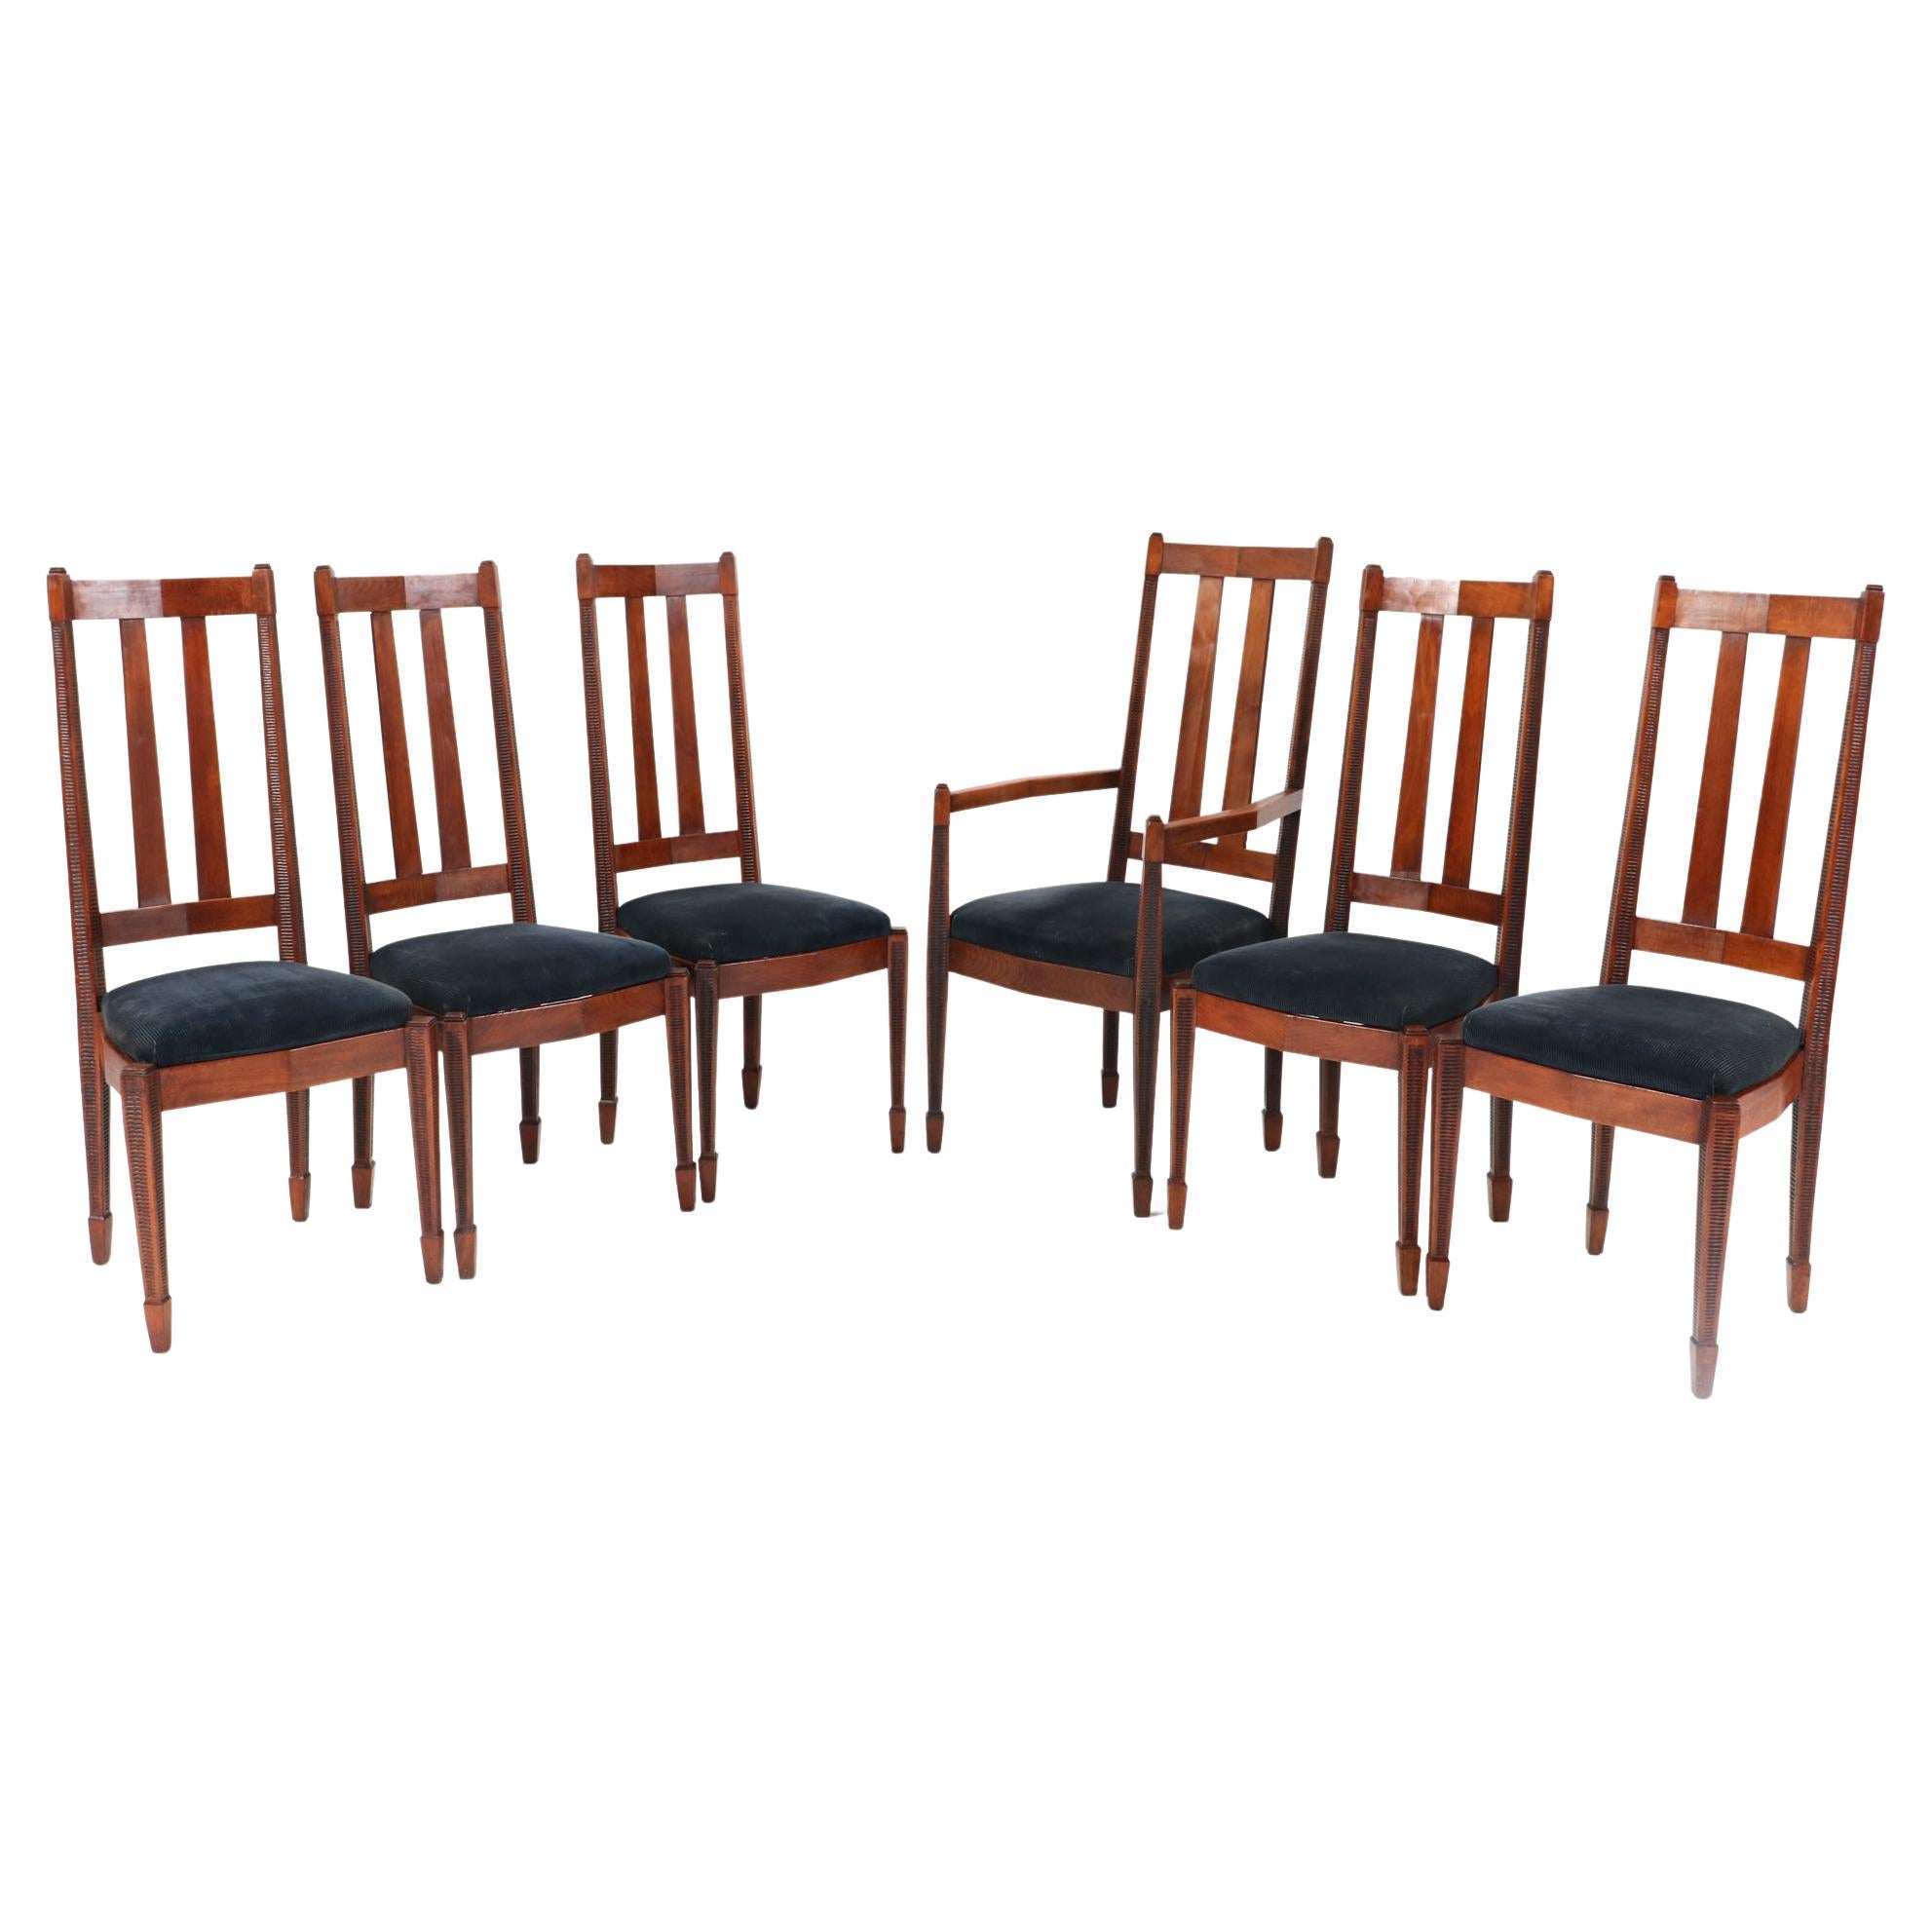 Set of Six Art Deco Amsterdamse School High Back Dining Room Chairs, 1920s